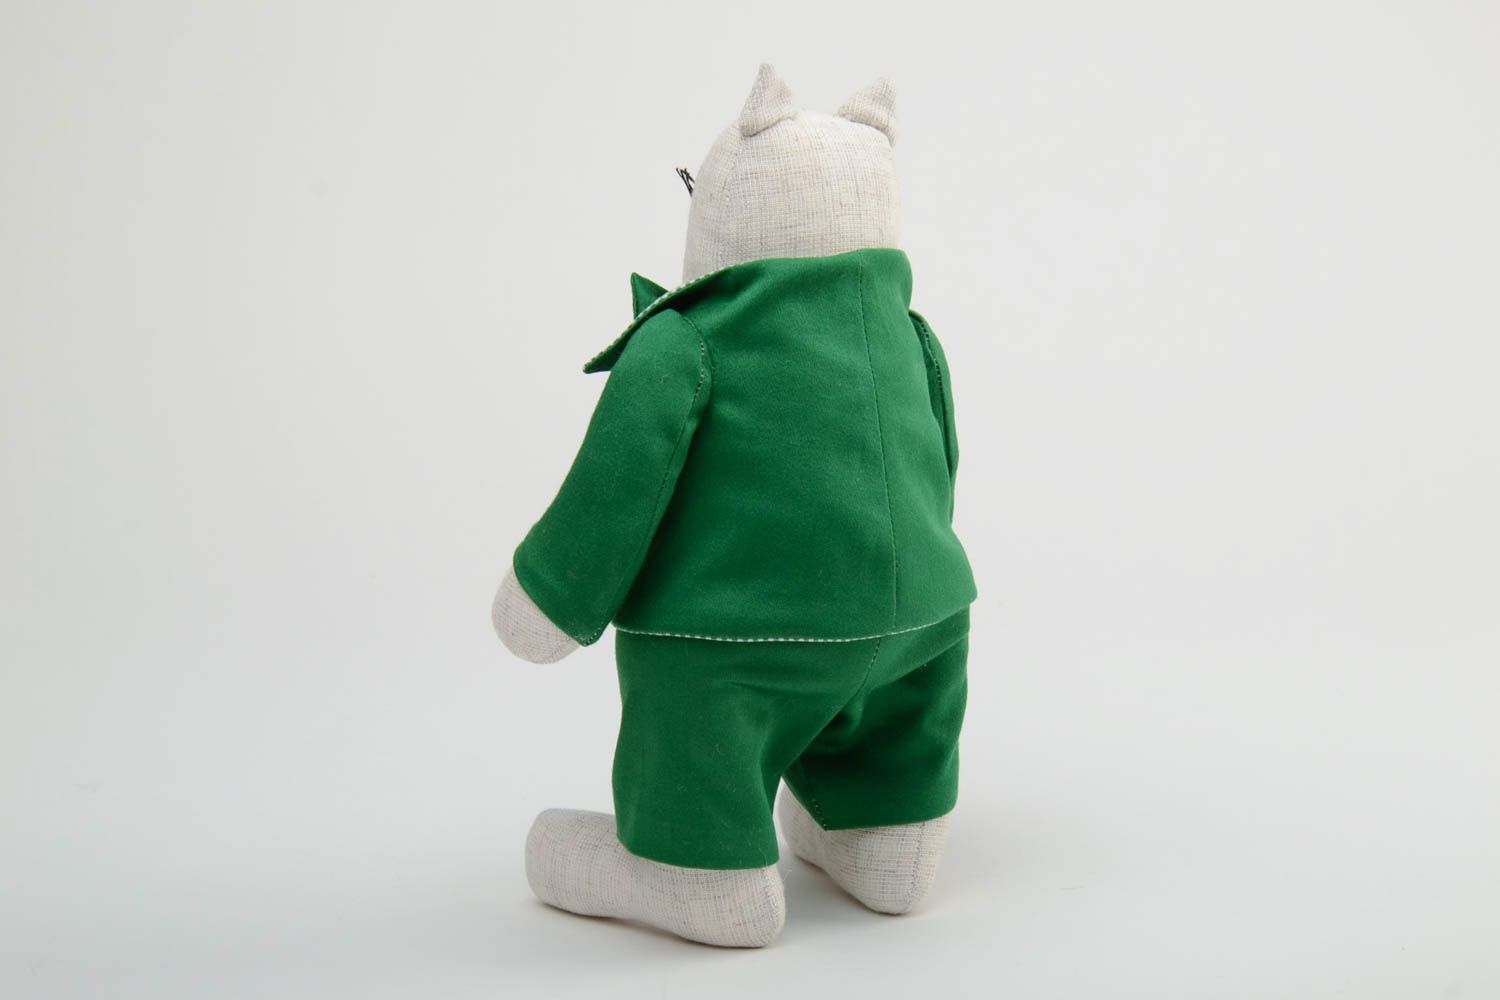 Handmade designer soft toy sewn of cotton fabric fat cat in green business suit photo 4